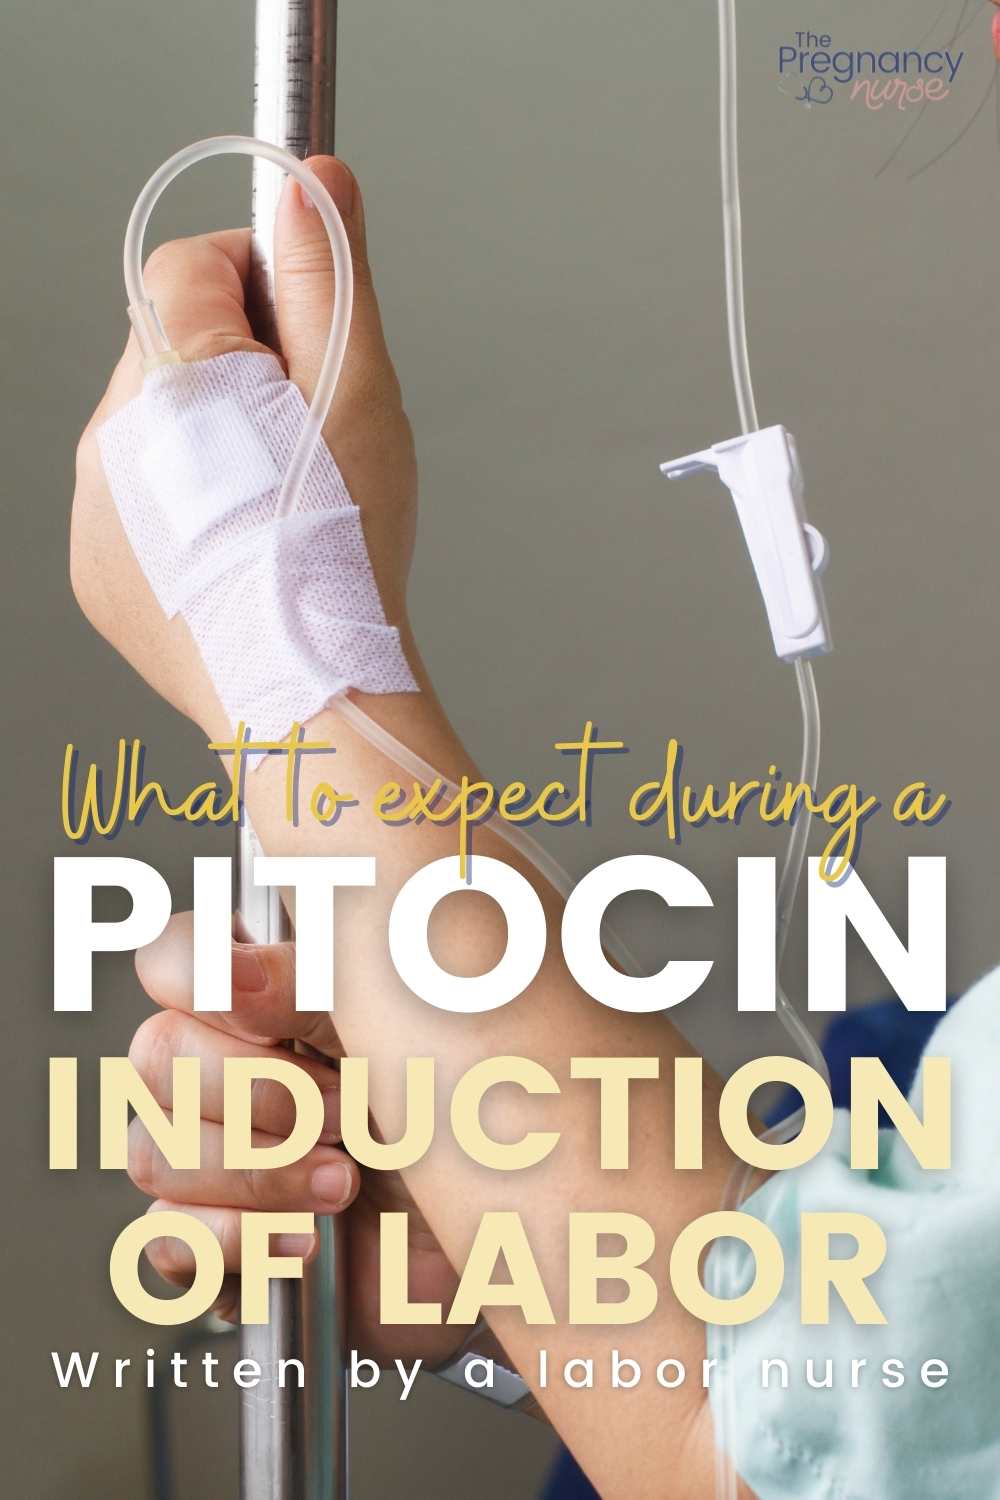 From medical reasons to natural labor, learn everything you need to know about inducing labor with pitocin. This hormone is often used in hospitals to help start contractions, but it can come with risks. Read on for a comprehensive guide that will answer all your questions.